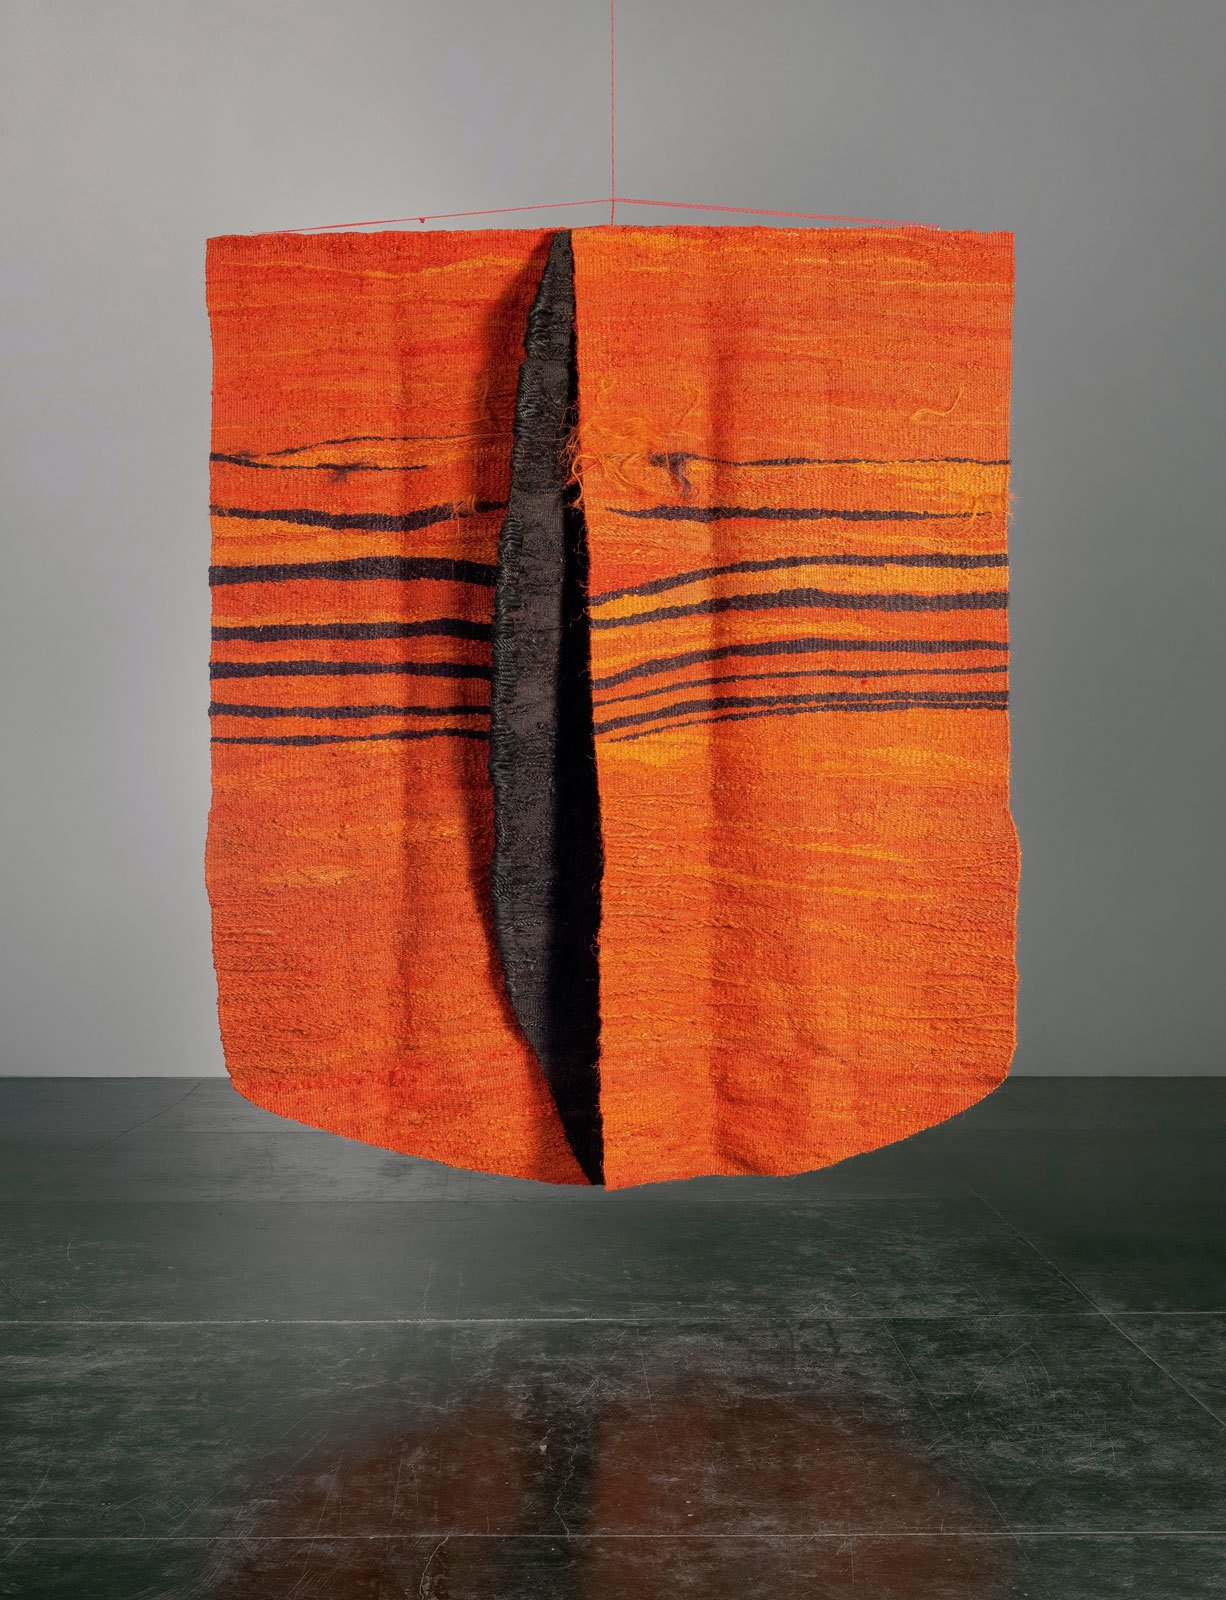 Magdalena Abakanowicz. Queen, Orange with Black, 1970&ndash;1980&copy; Starmach Gallery